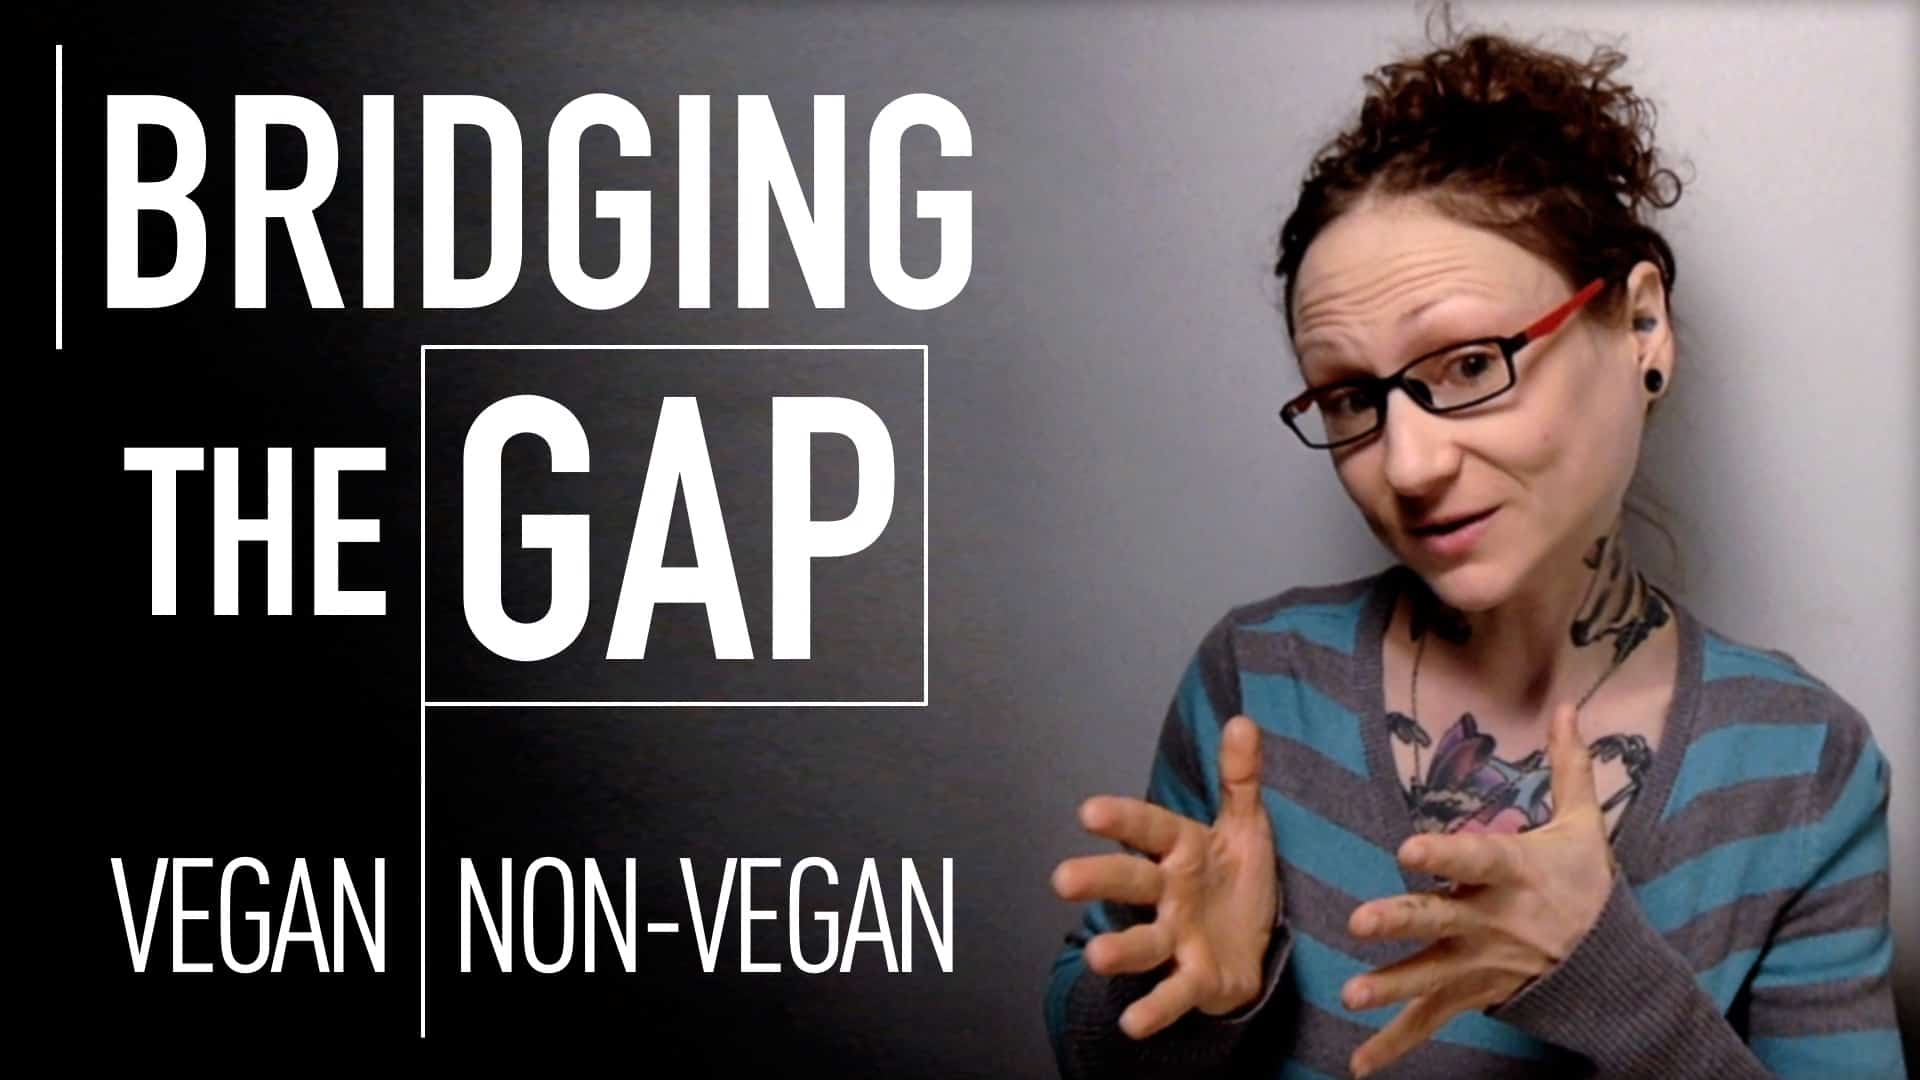 Emily Moran Barwick of Bite Size Vegan is shown holding her arms up as if indicating a gap size. To the left of her are the words: ” Bridging the gap. Vegan Non-vegan”